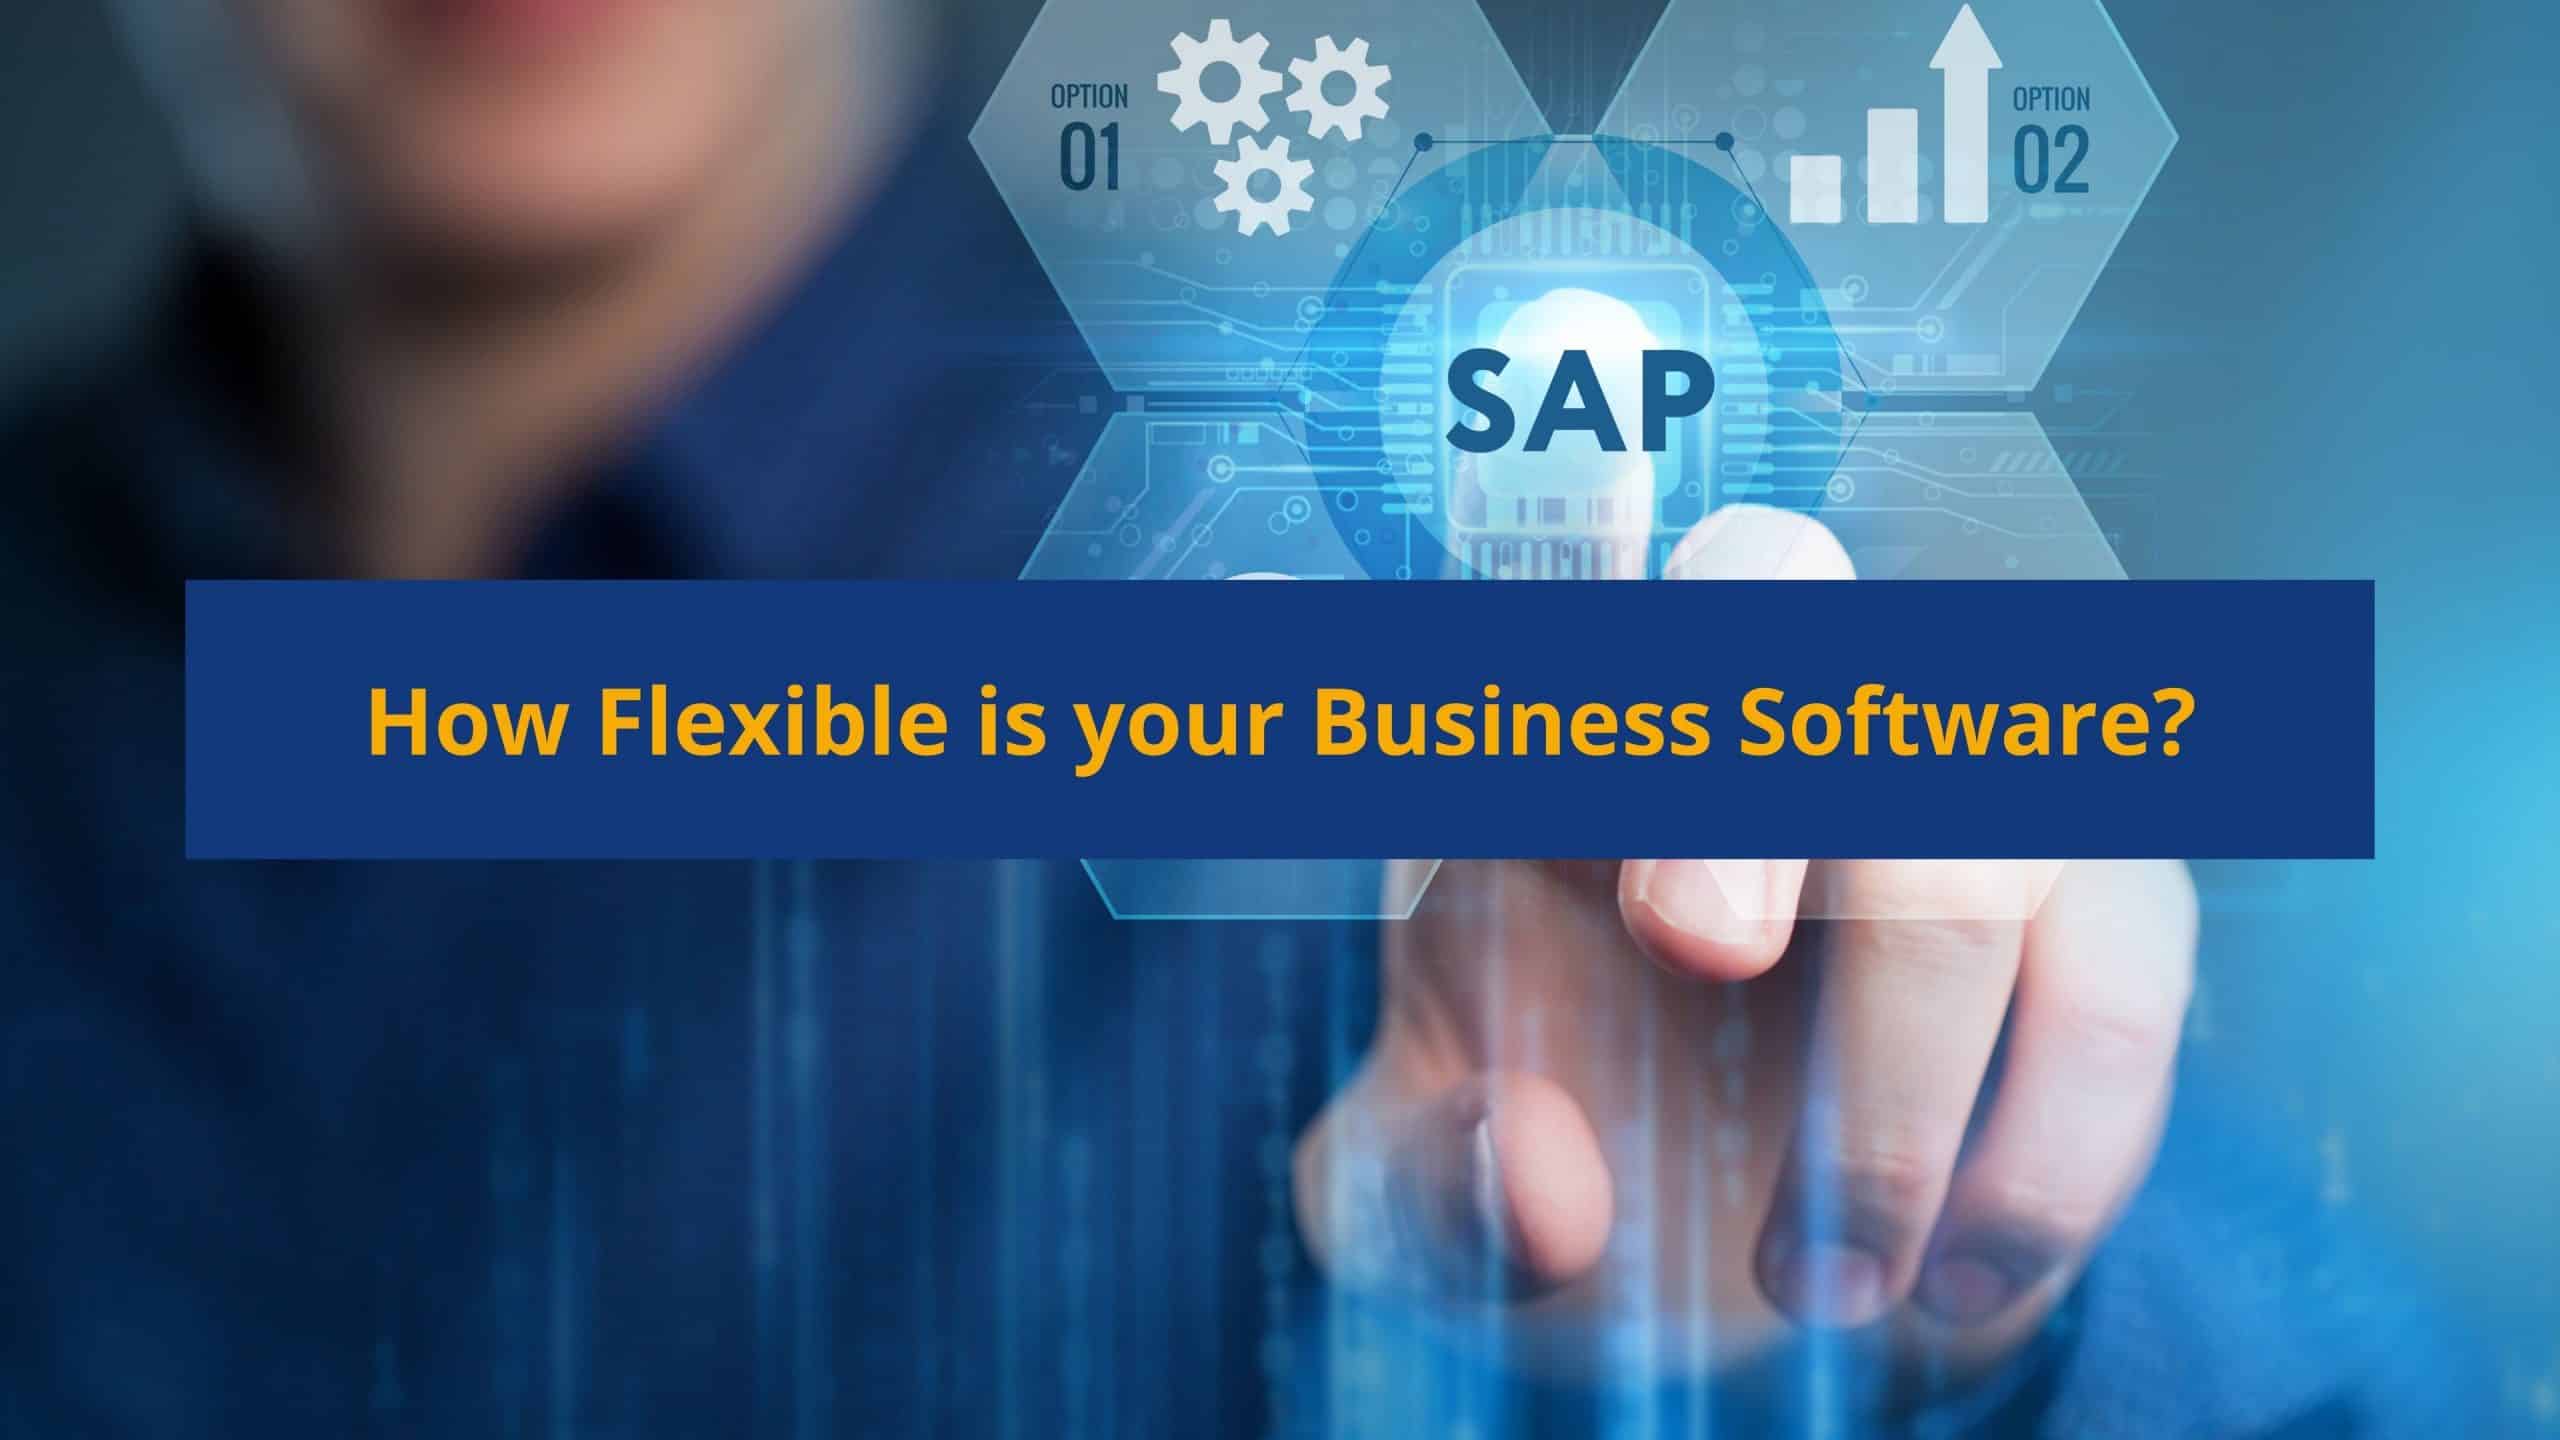 How Flexible is your Business Software?